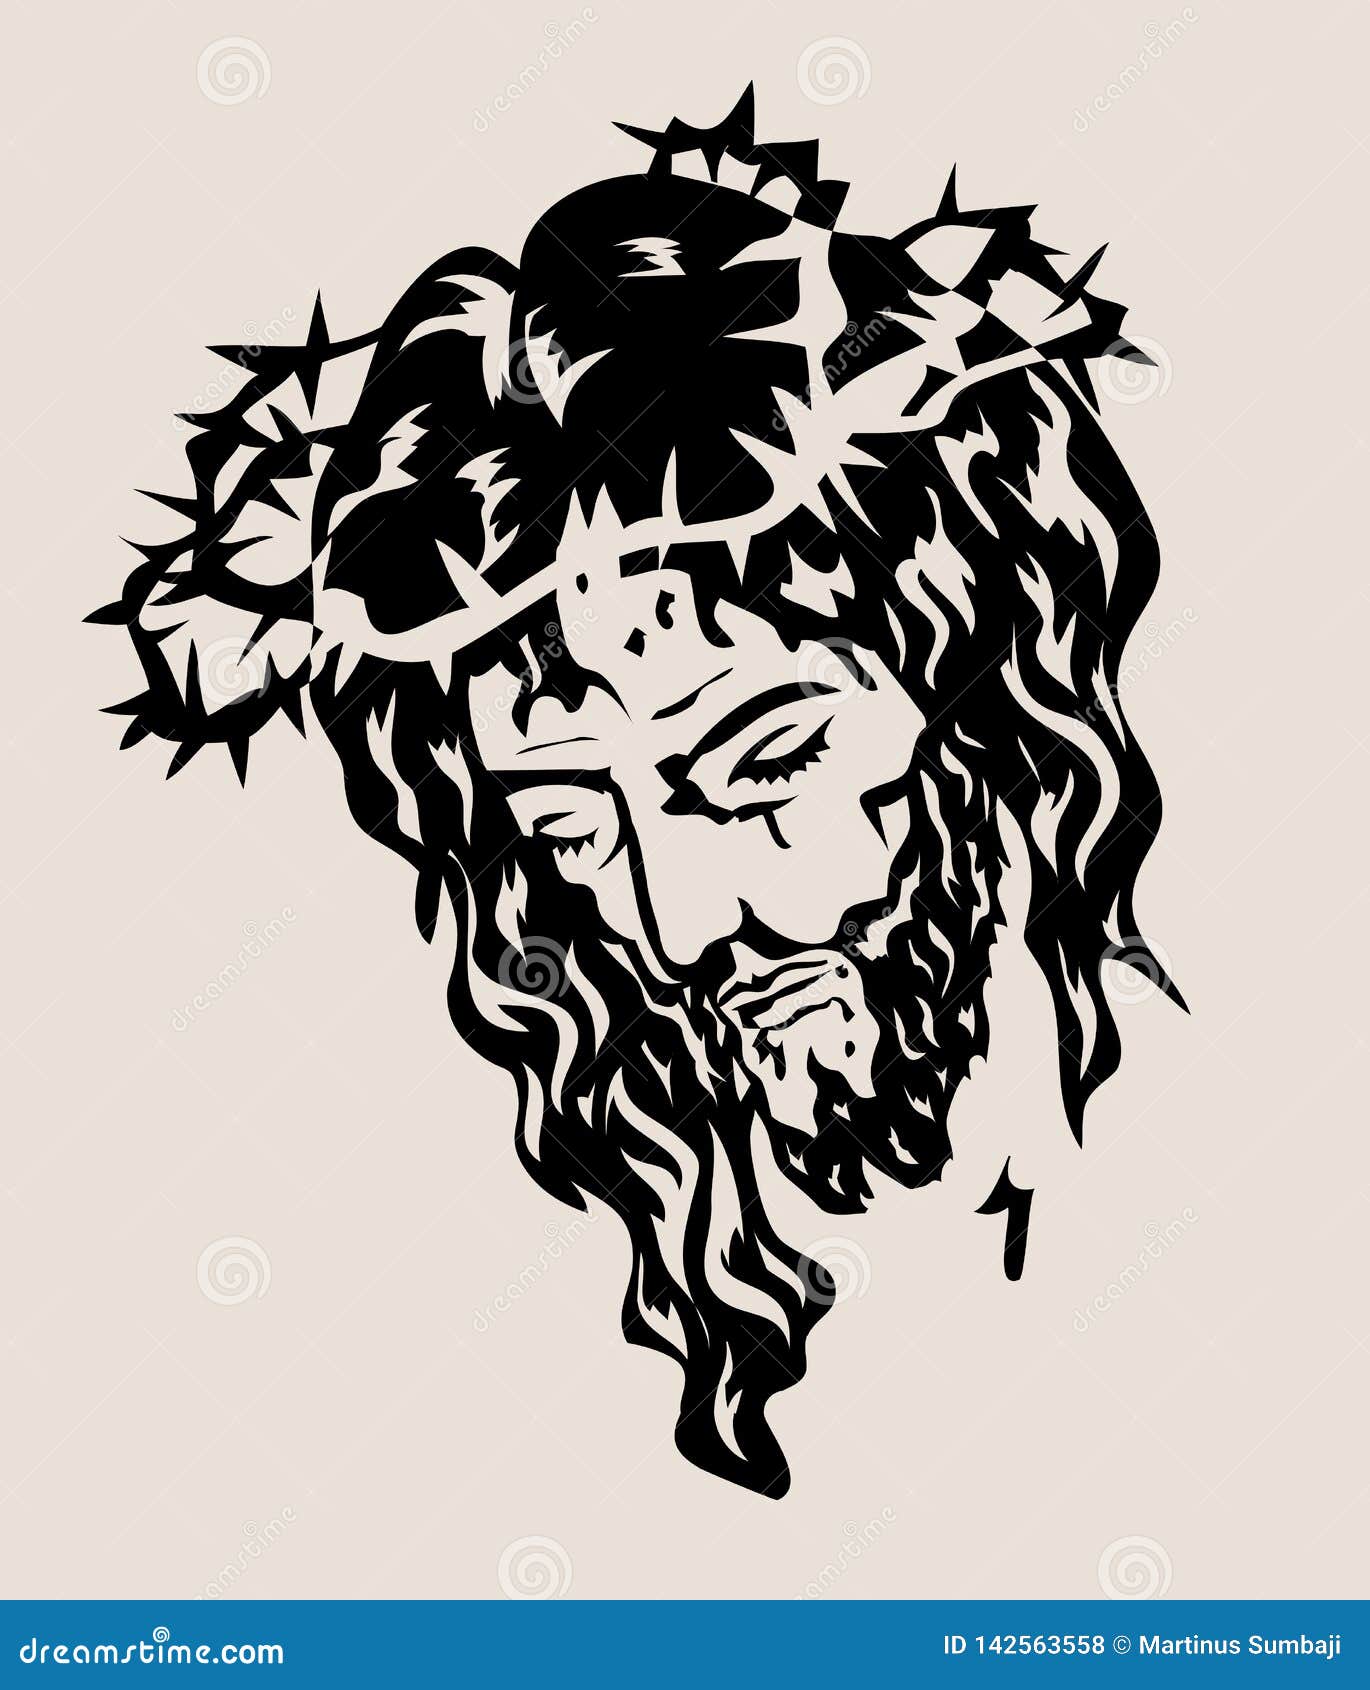 Jesus the Savior Sketch Drawing Stock Vector - Illustration of abstract ...